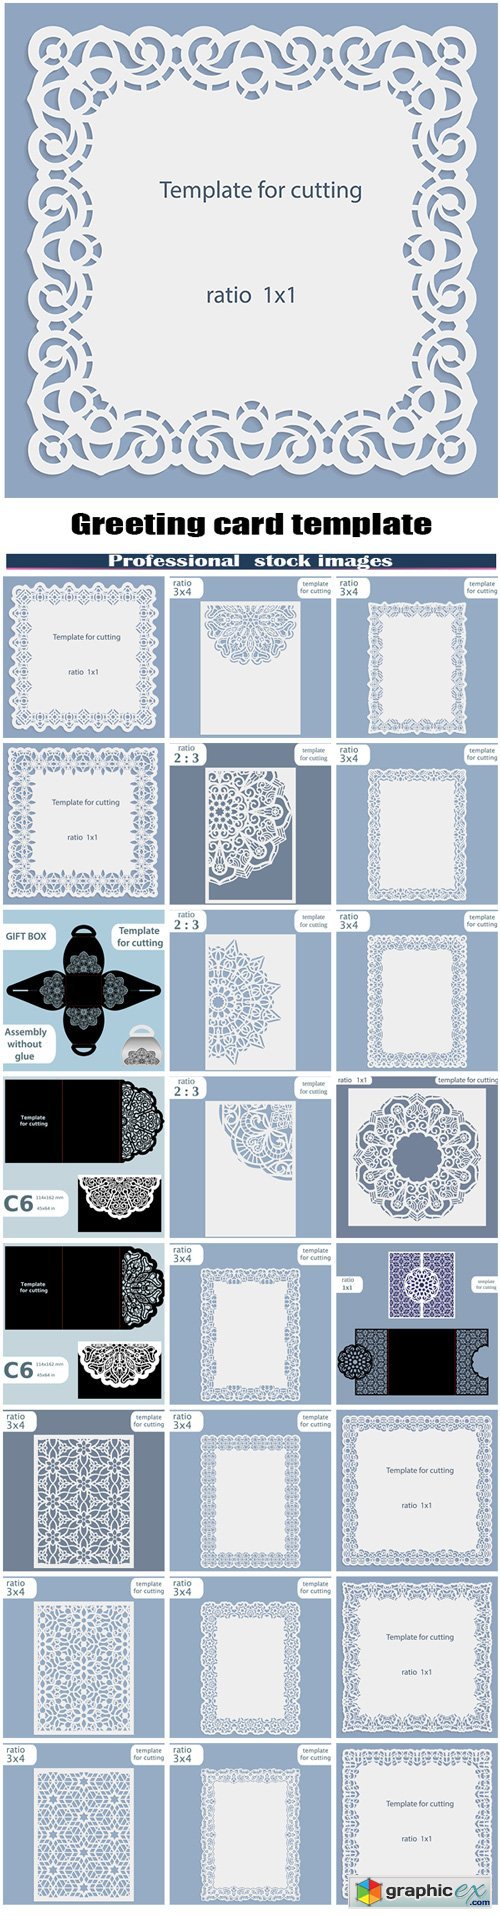 Greeting card template for cutting plotter #5